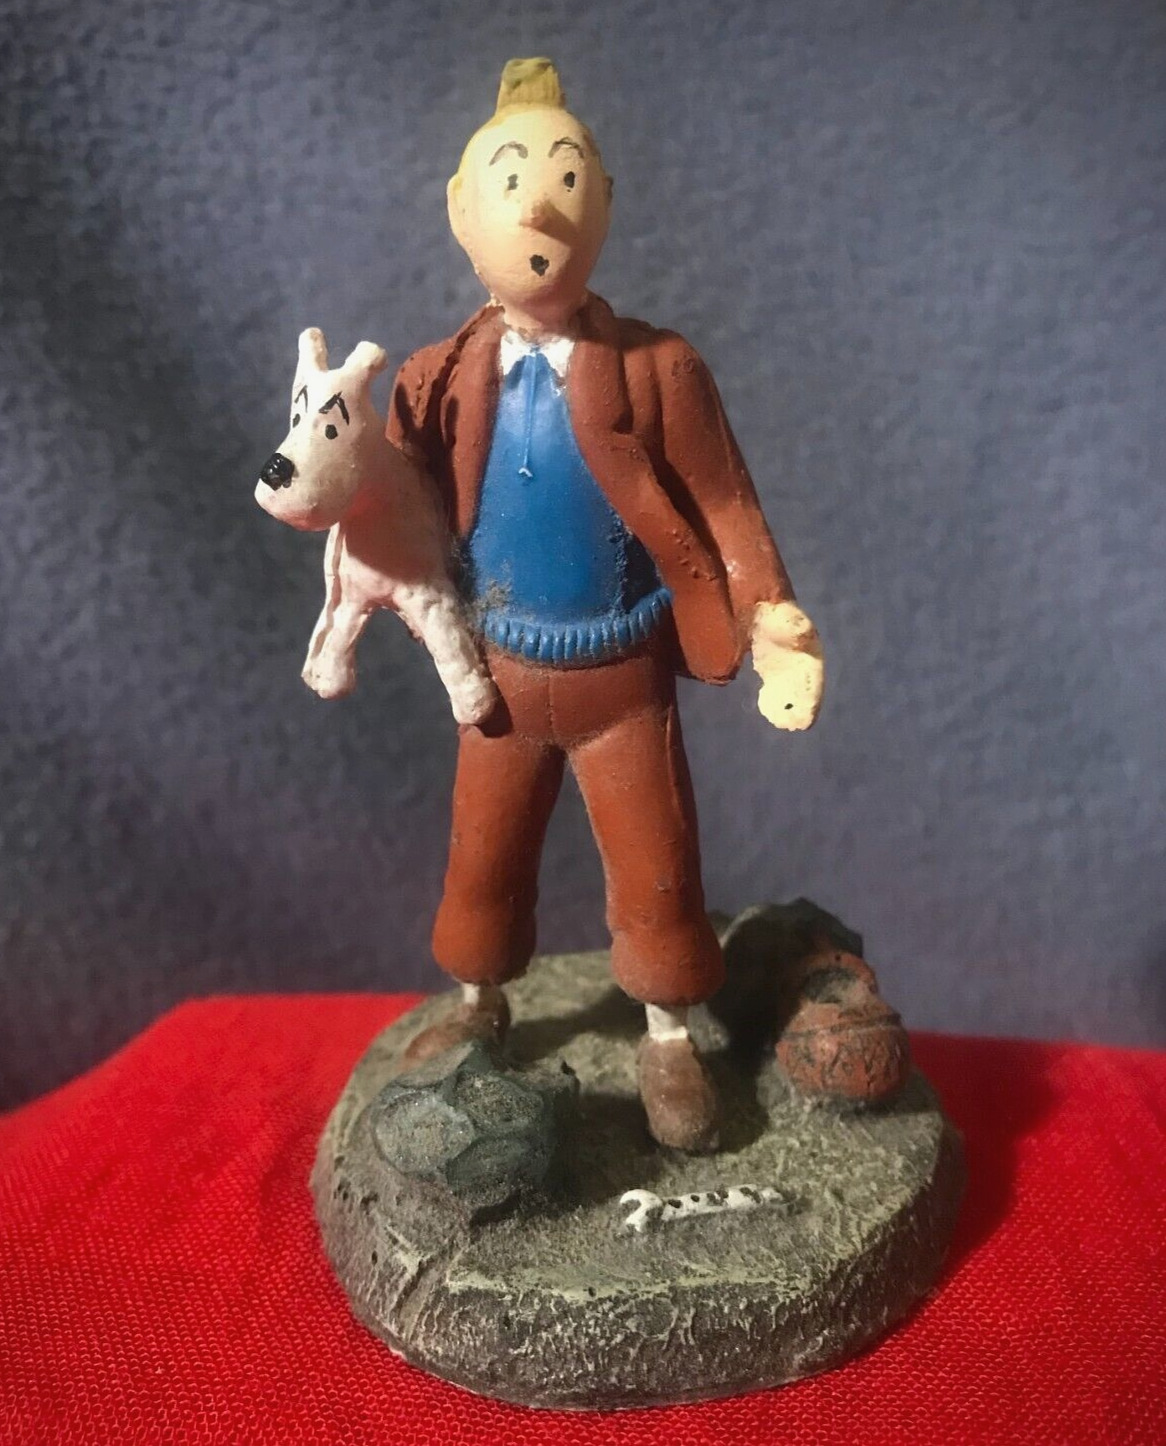 TINTIN and SNOWY Hand-painted resin miniature sculpture The Adventures of Tintin